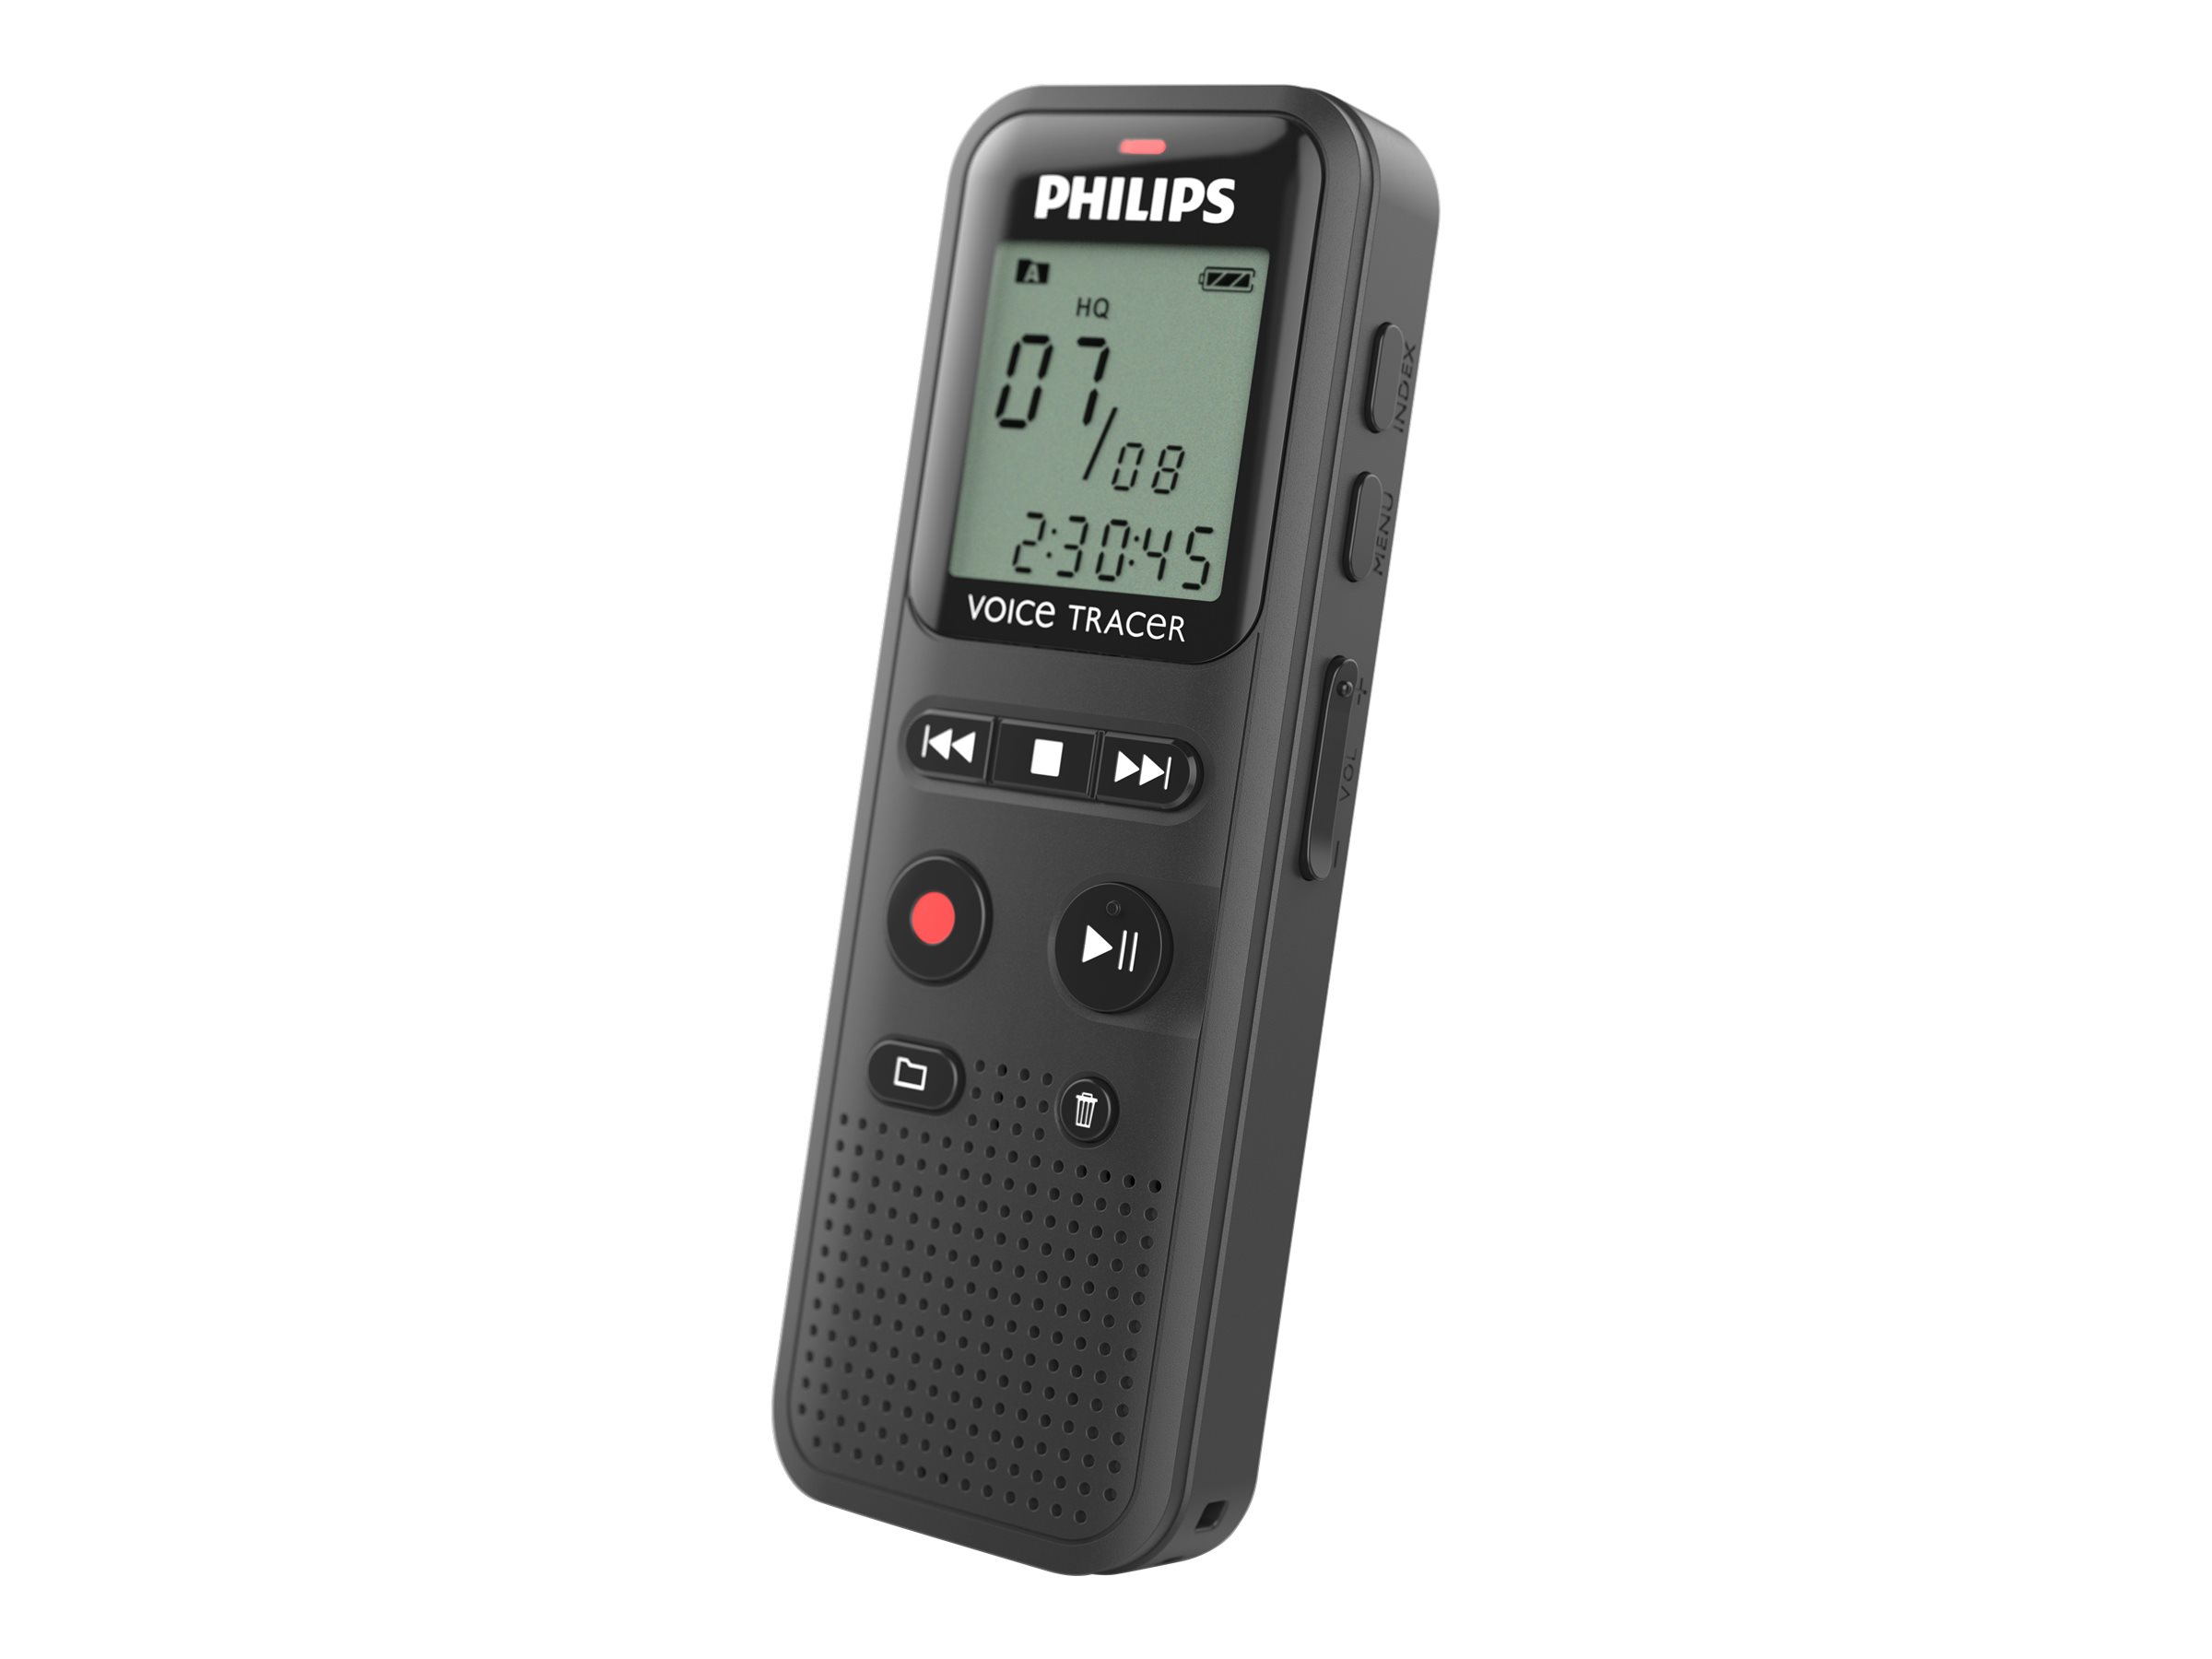 Philips Voice Tracer DVT1150 - Voice recorder - 4 GB - black - image 1 of 7